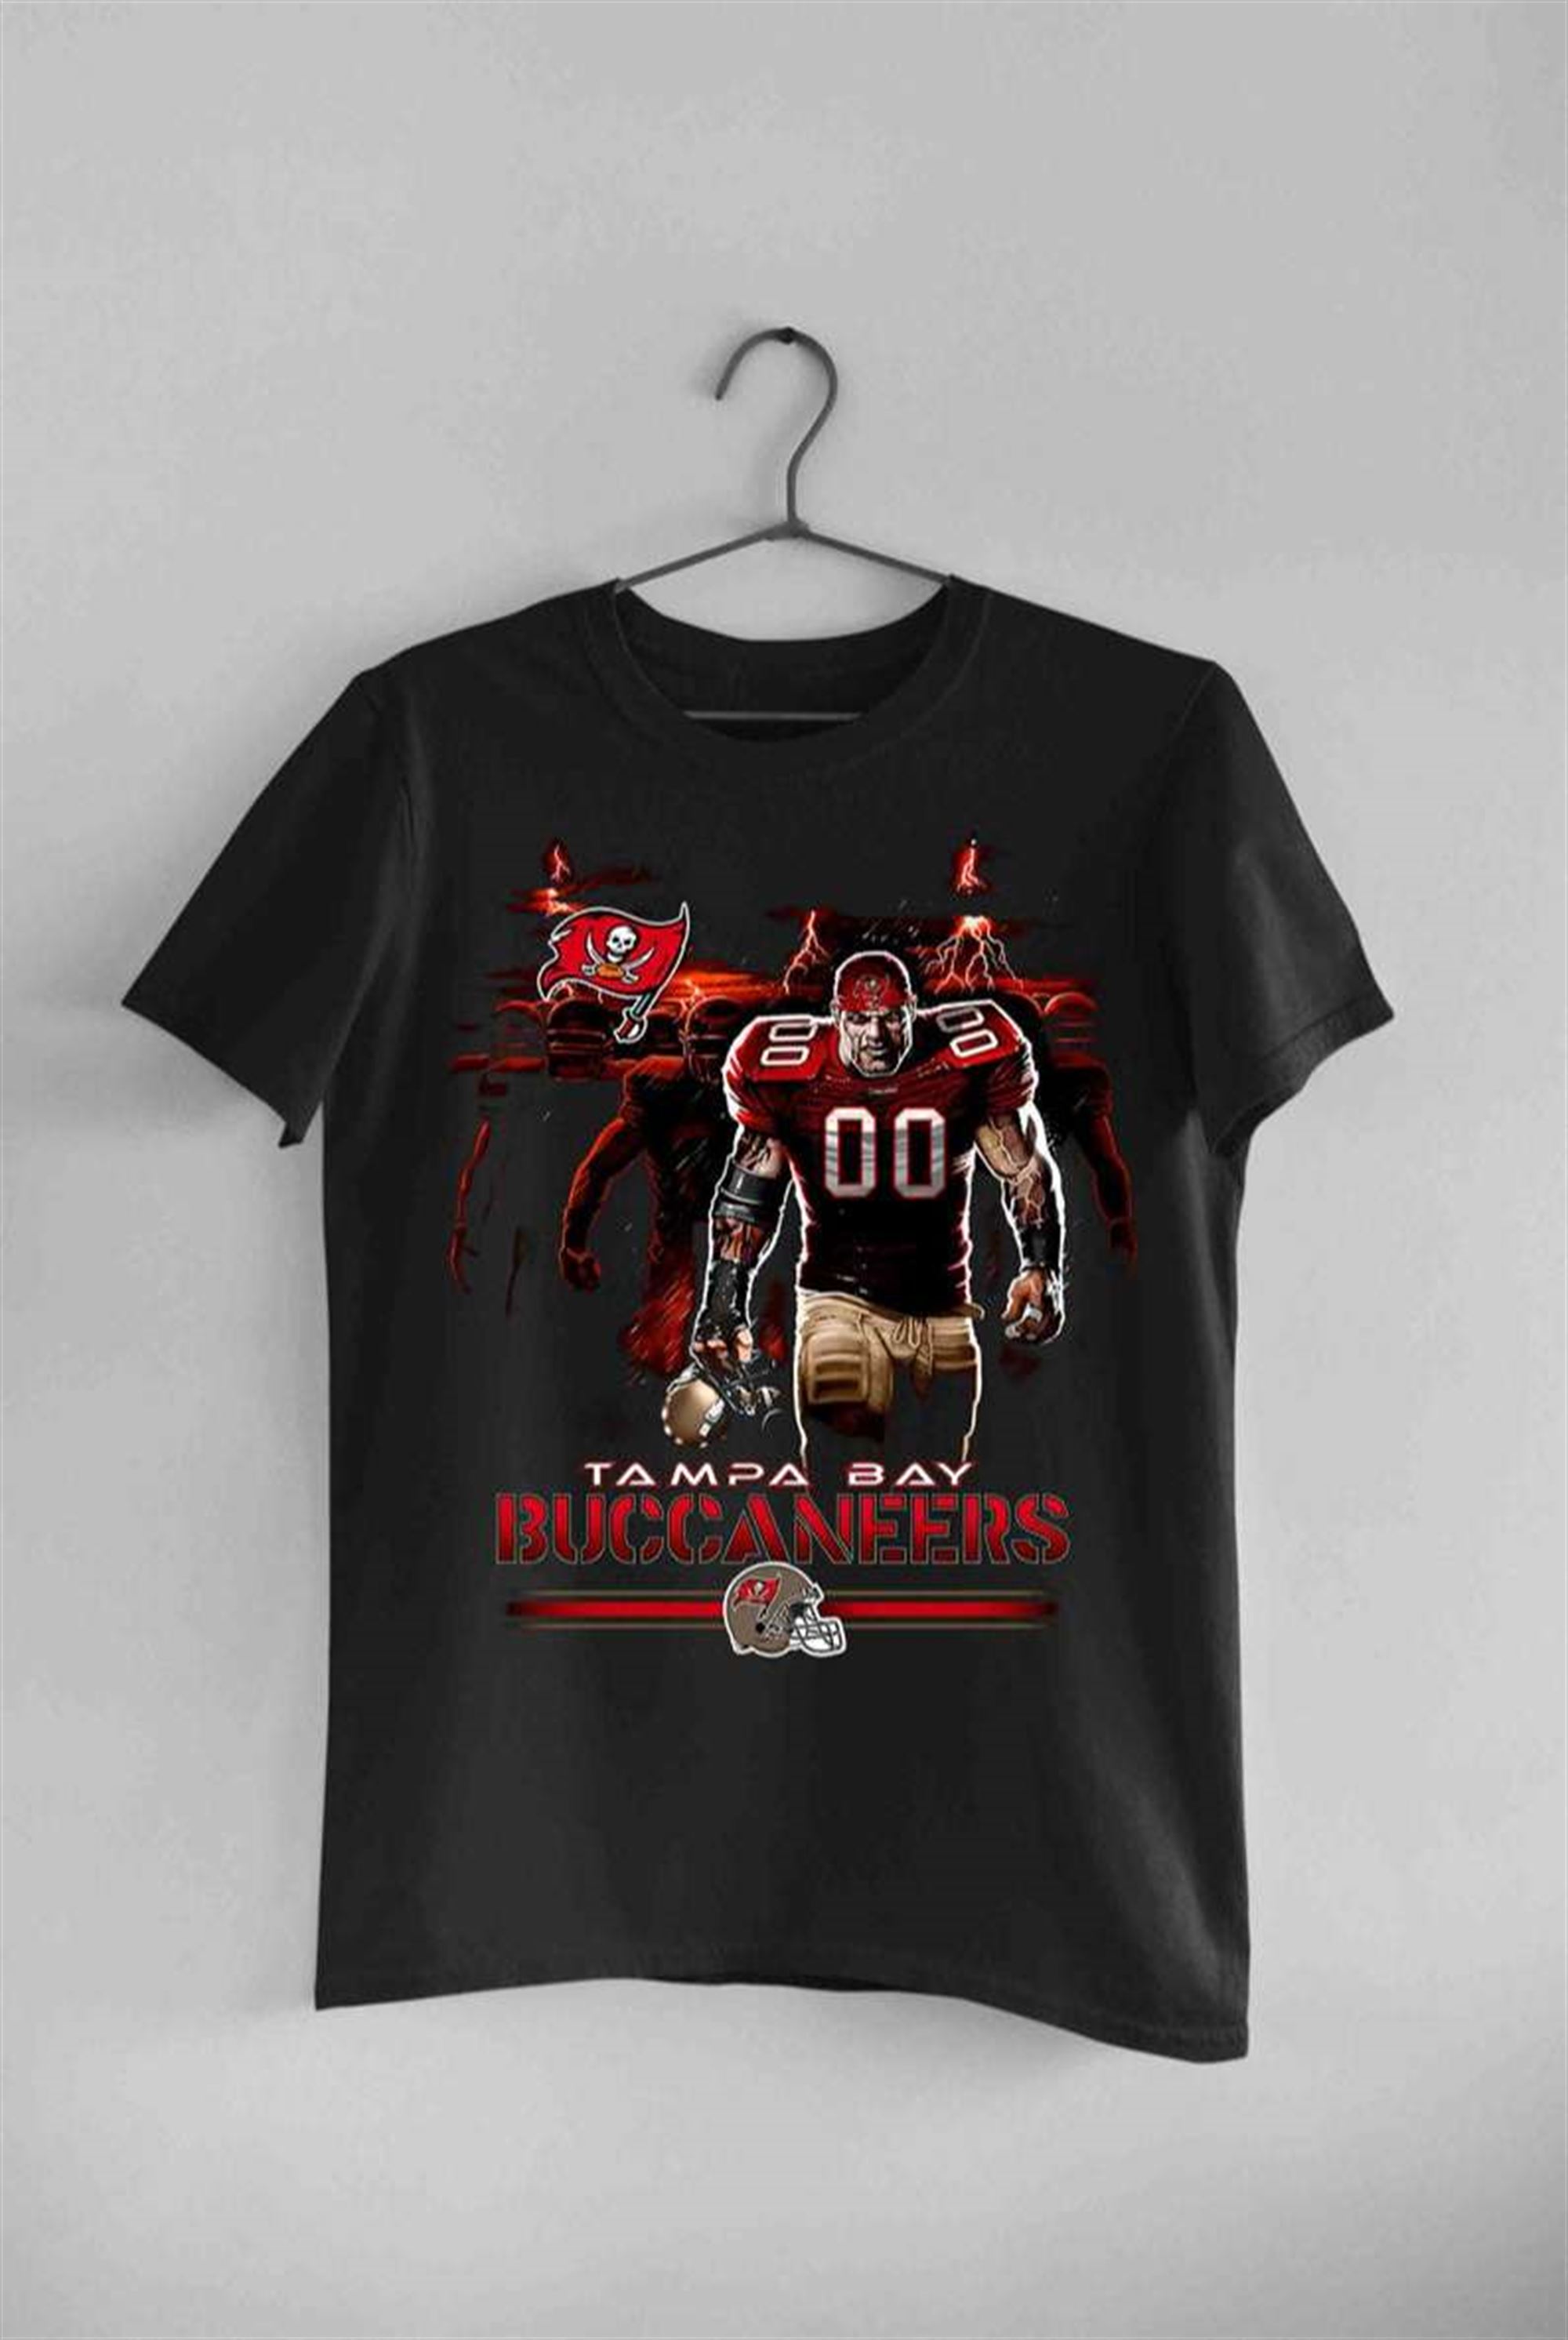 Tampa Bay Buccaneers Tunnel Black T-shirt Size Up To 5xl